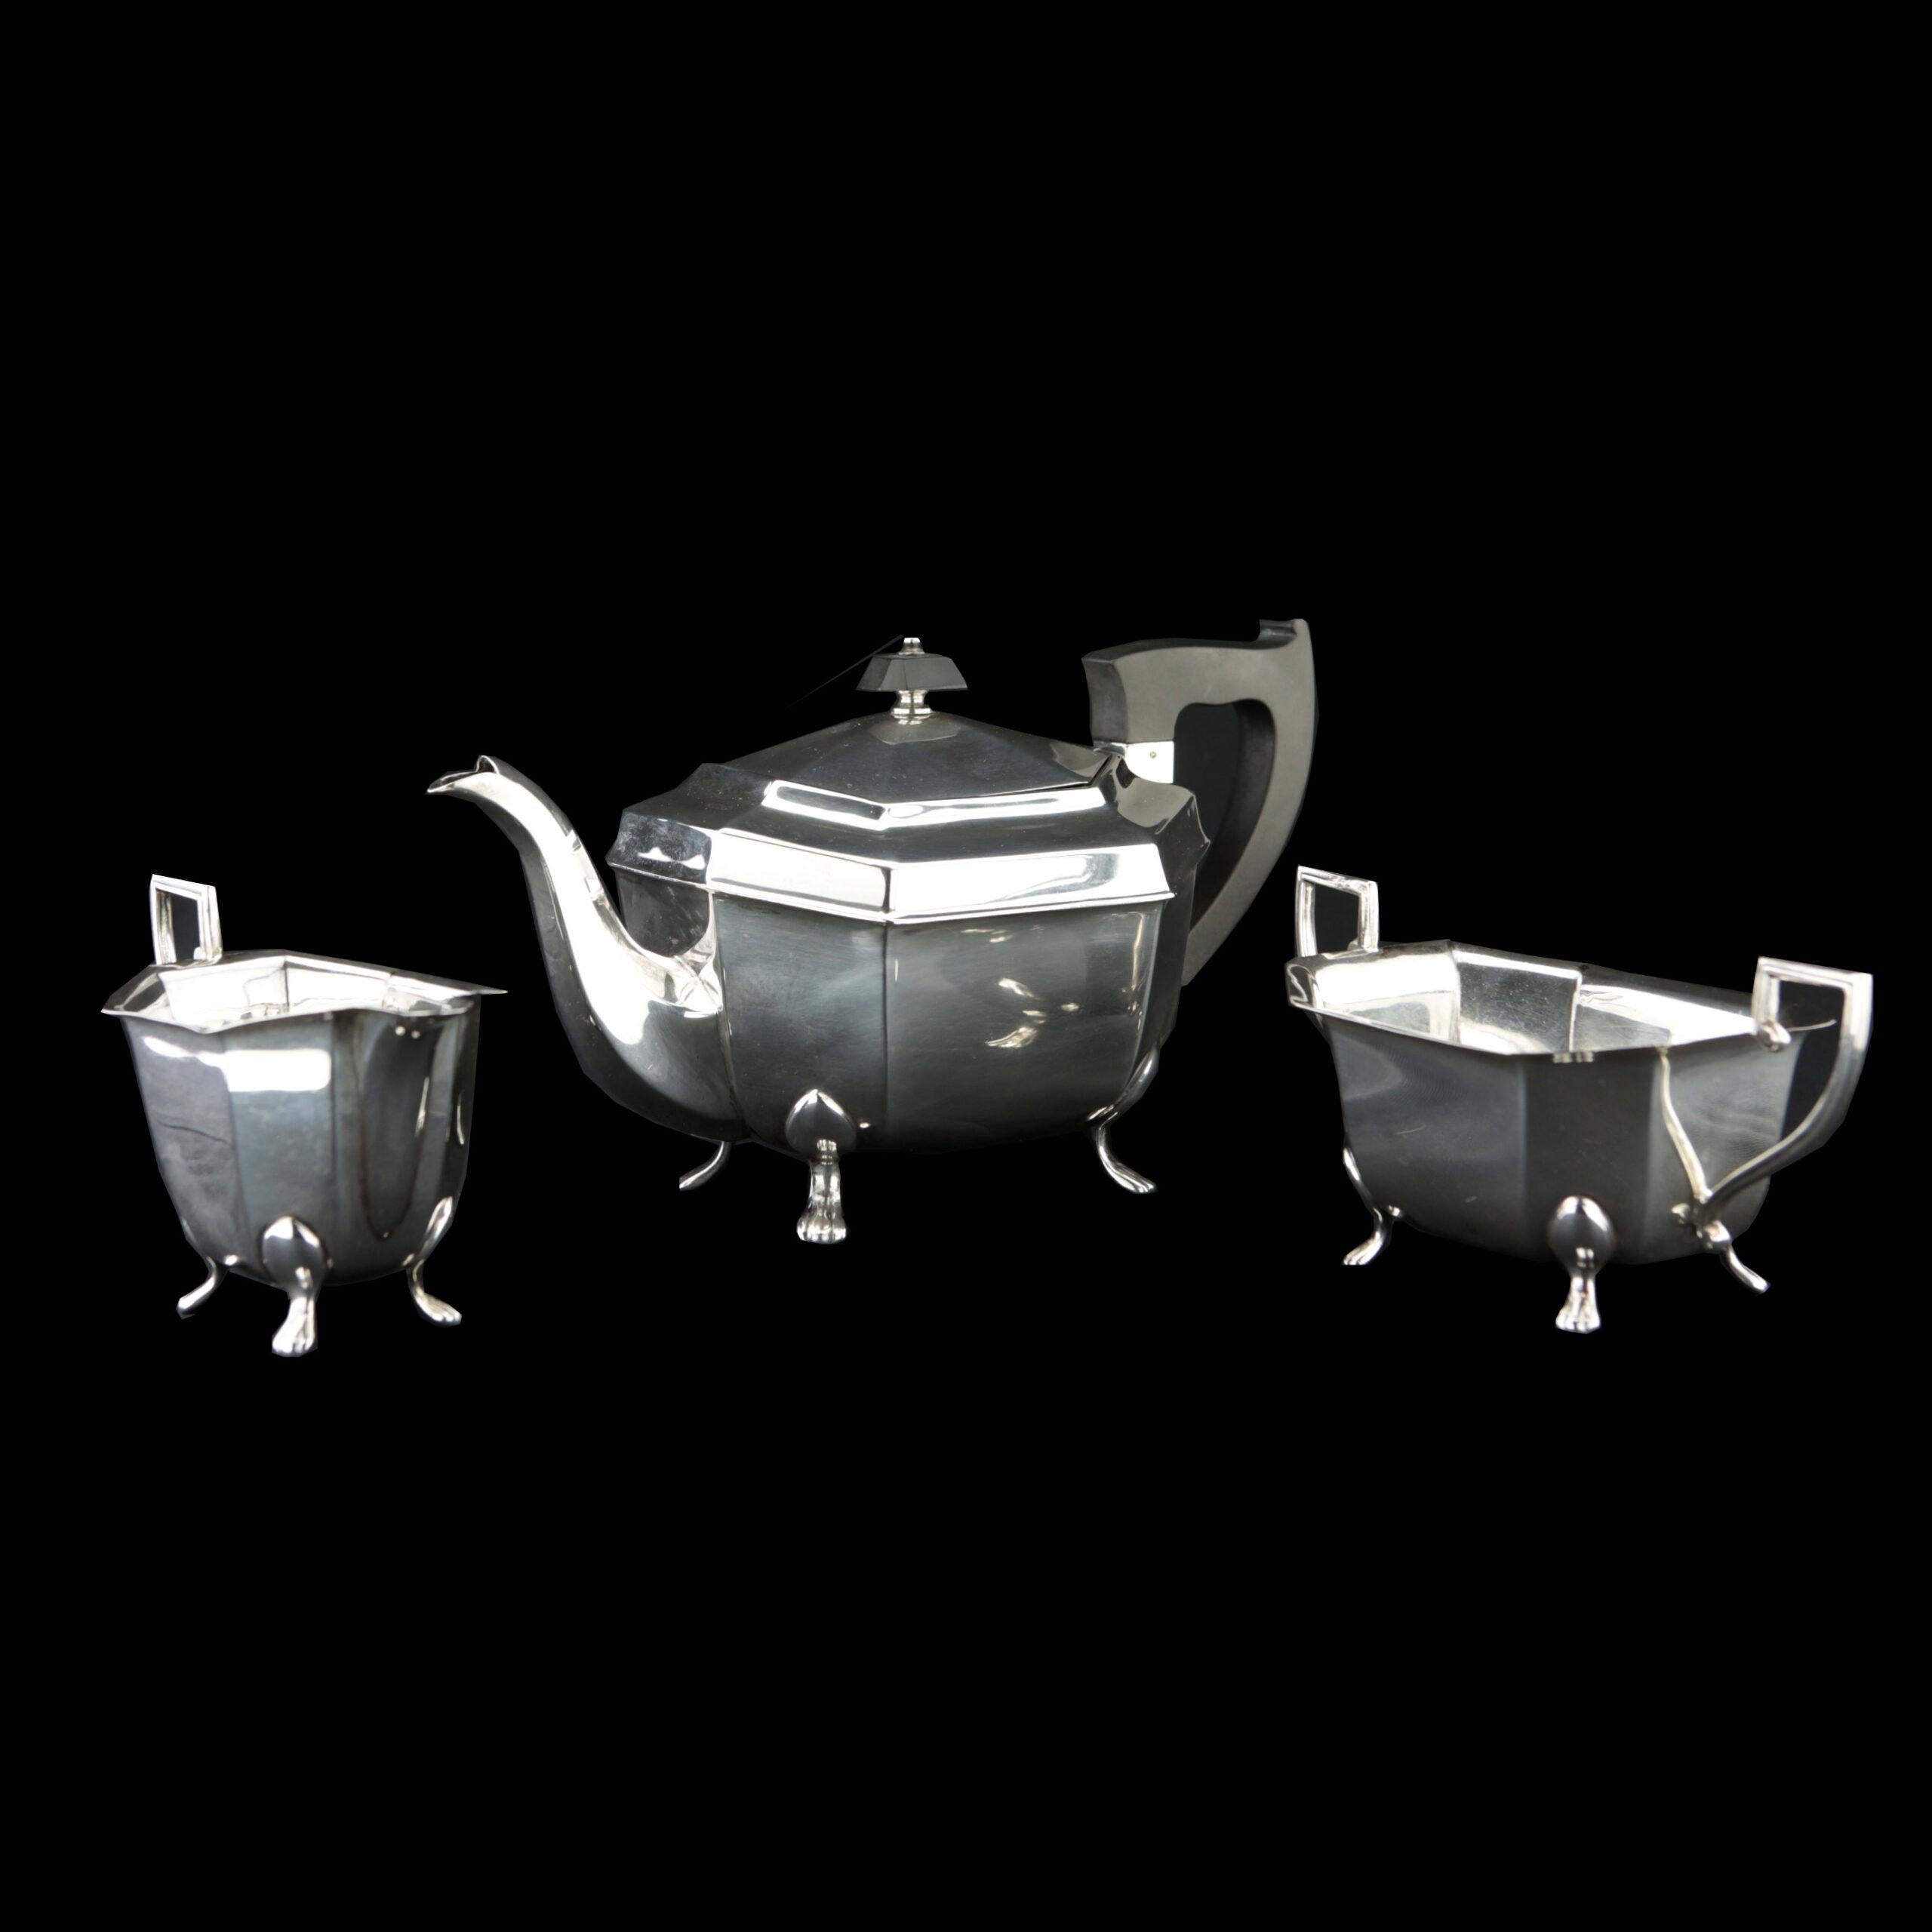 Tea set, teapot, milk jug, sugar pot, 8-sided basic shape, standing on four feet, 925 sterling silver, Sheffield 1946, hallmarked.
A wonderful set in late Art Deco style, perfect for tea time for 2-4 people. The classic octagonal shape is